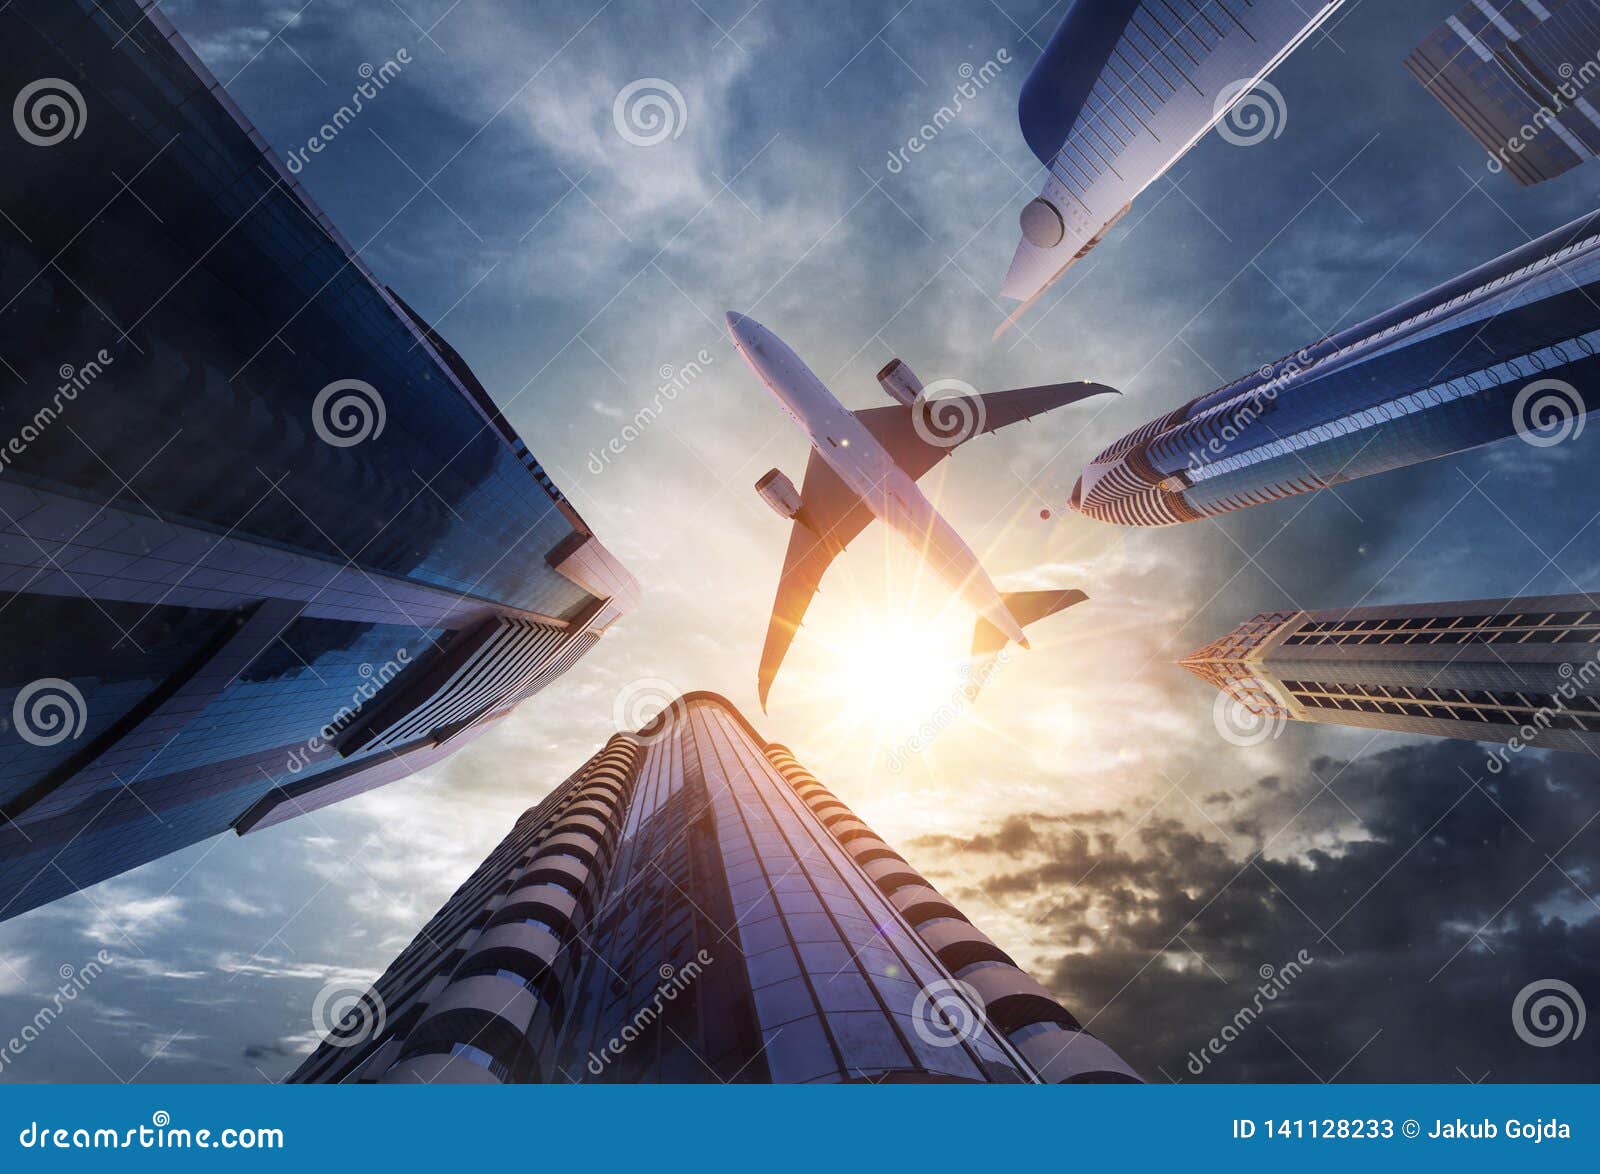 Commercial Airplane Flying Above Skyscrapers Stock Image Image of finance, corporation 141128233